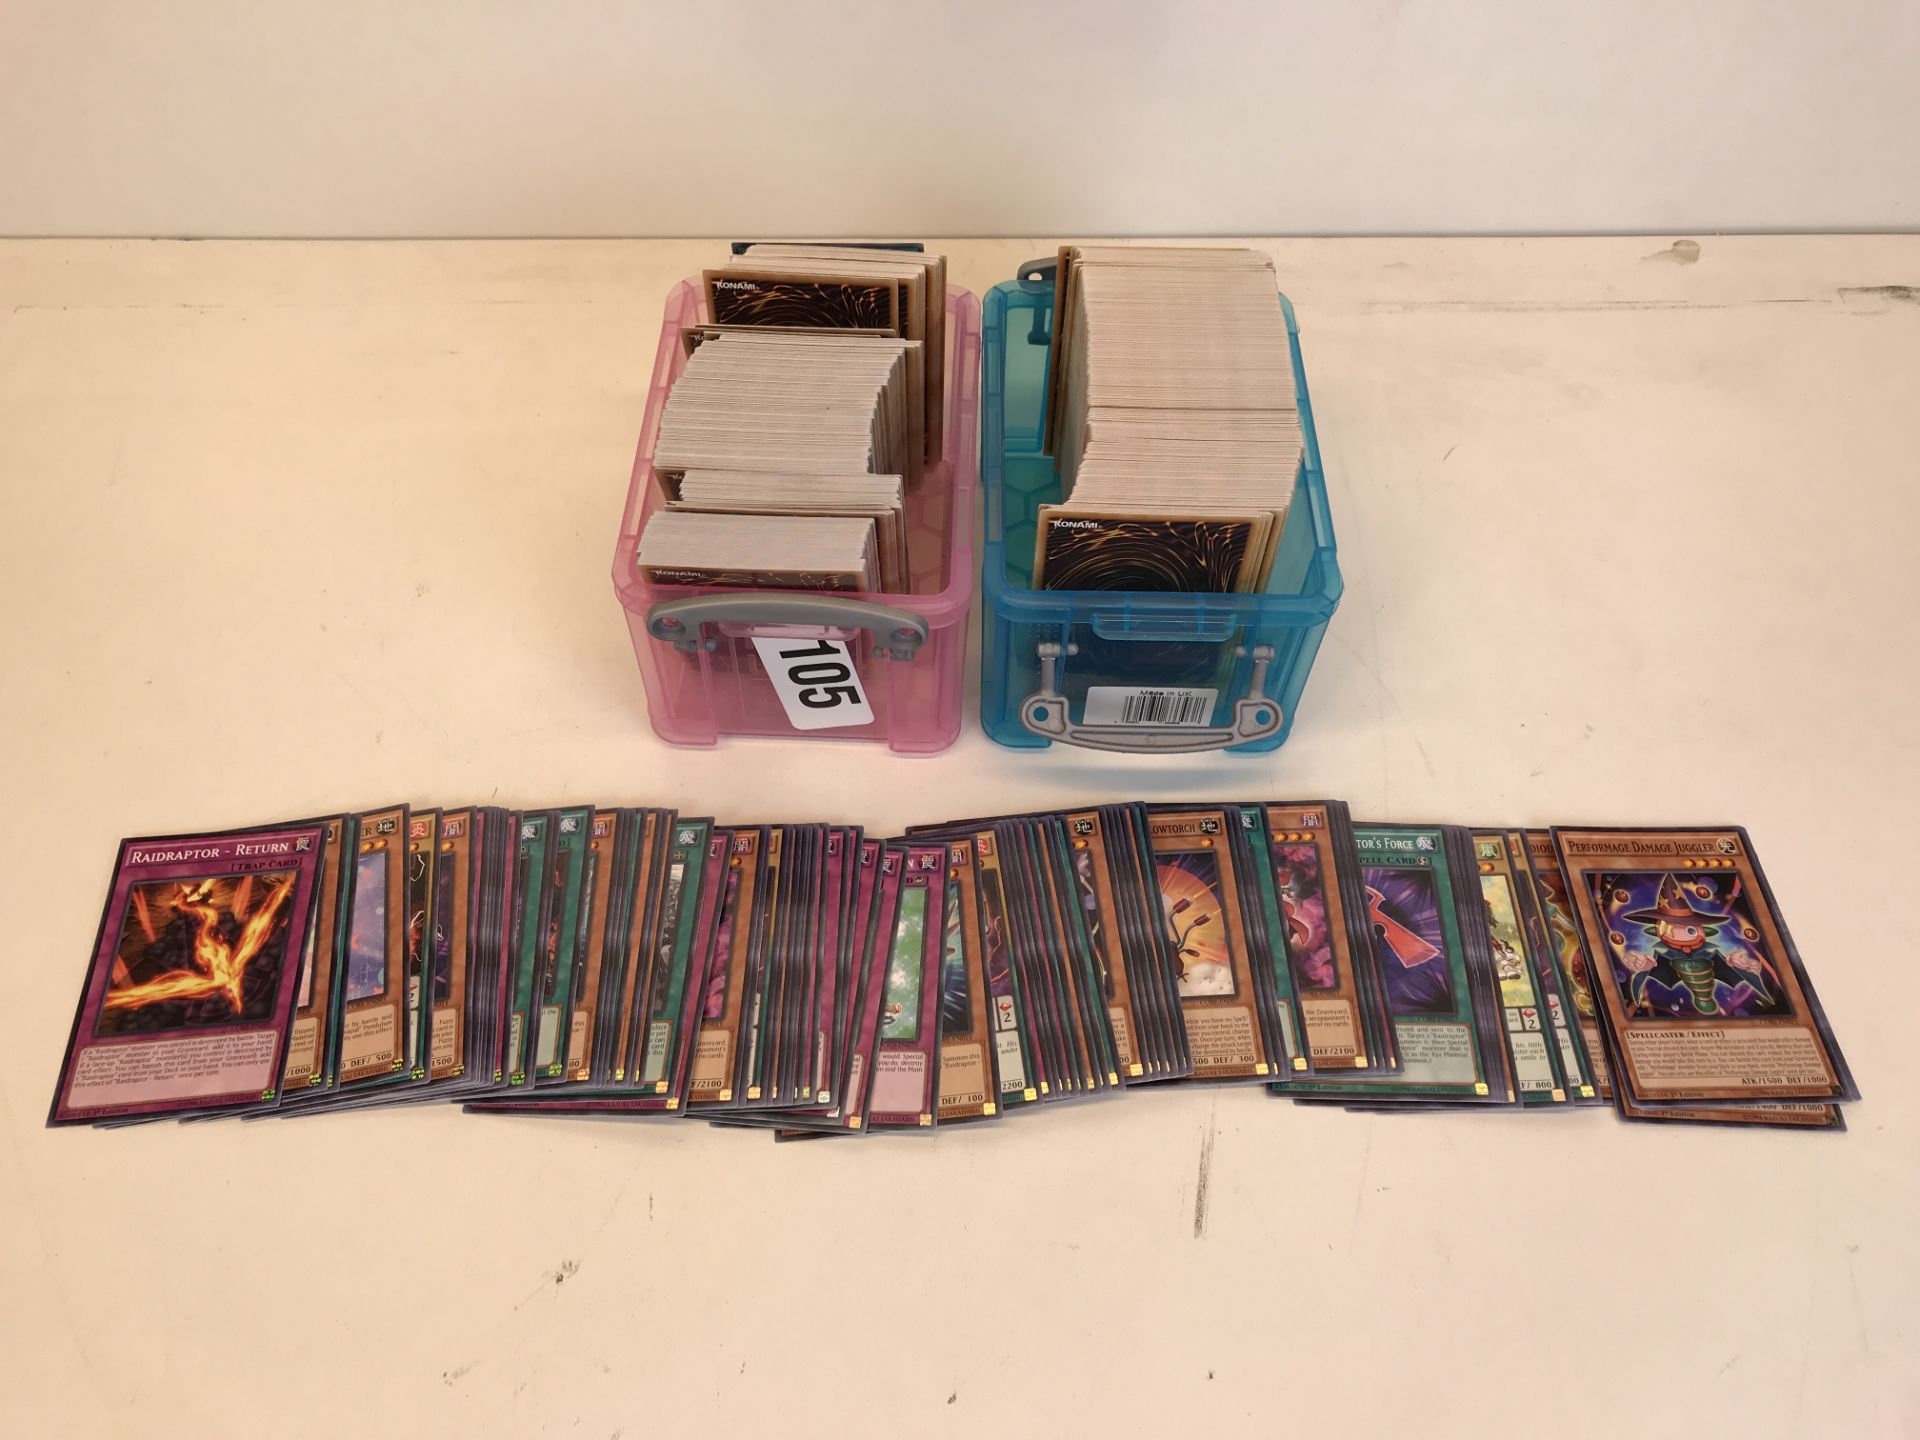 2 x Boxes of Yu-Gi-Oh! Cards